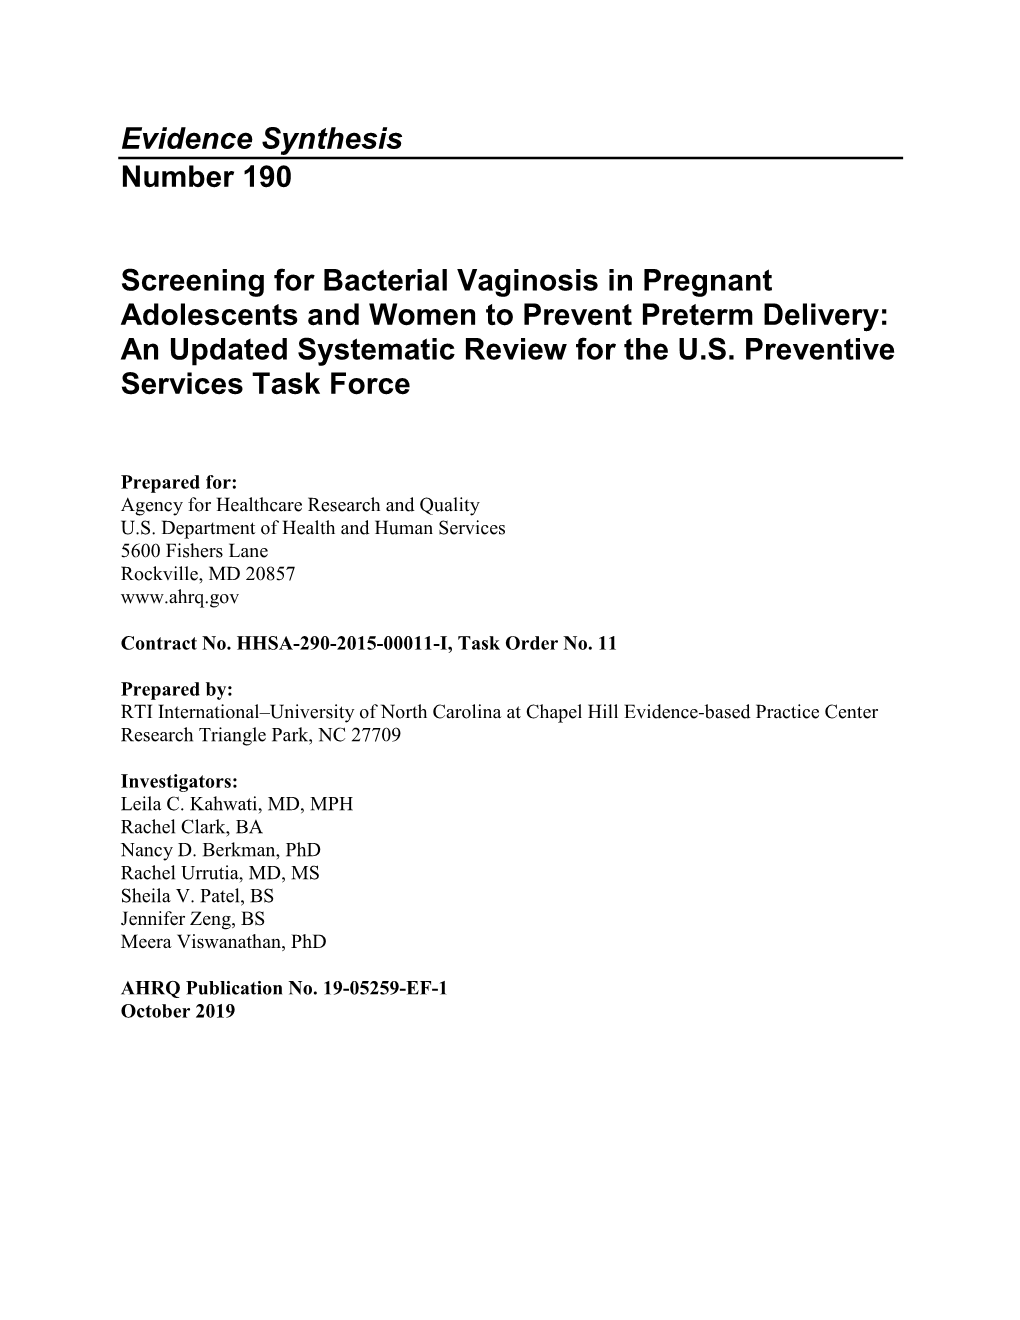 Screening for Bacterial Vaginosis in Pregnant Adolescents and Women to Prevent Preterm Delivery: an Updated Systematic Review for the U.S